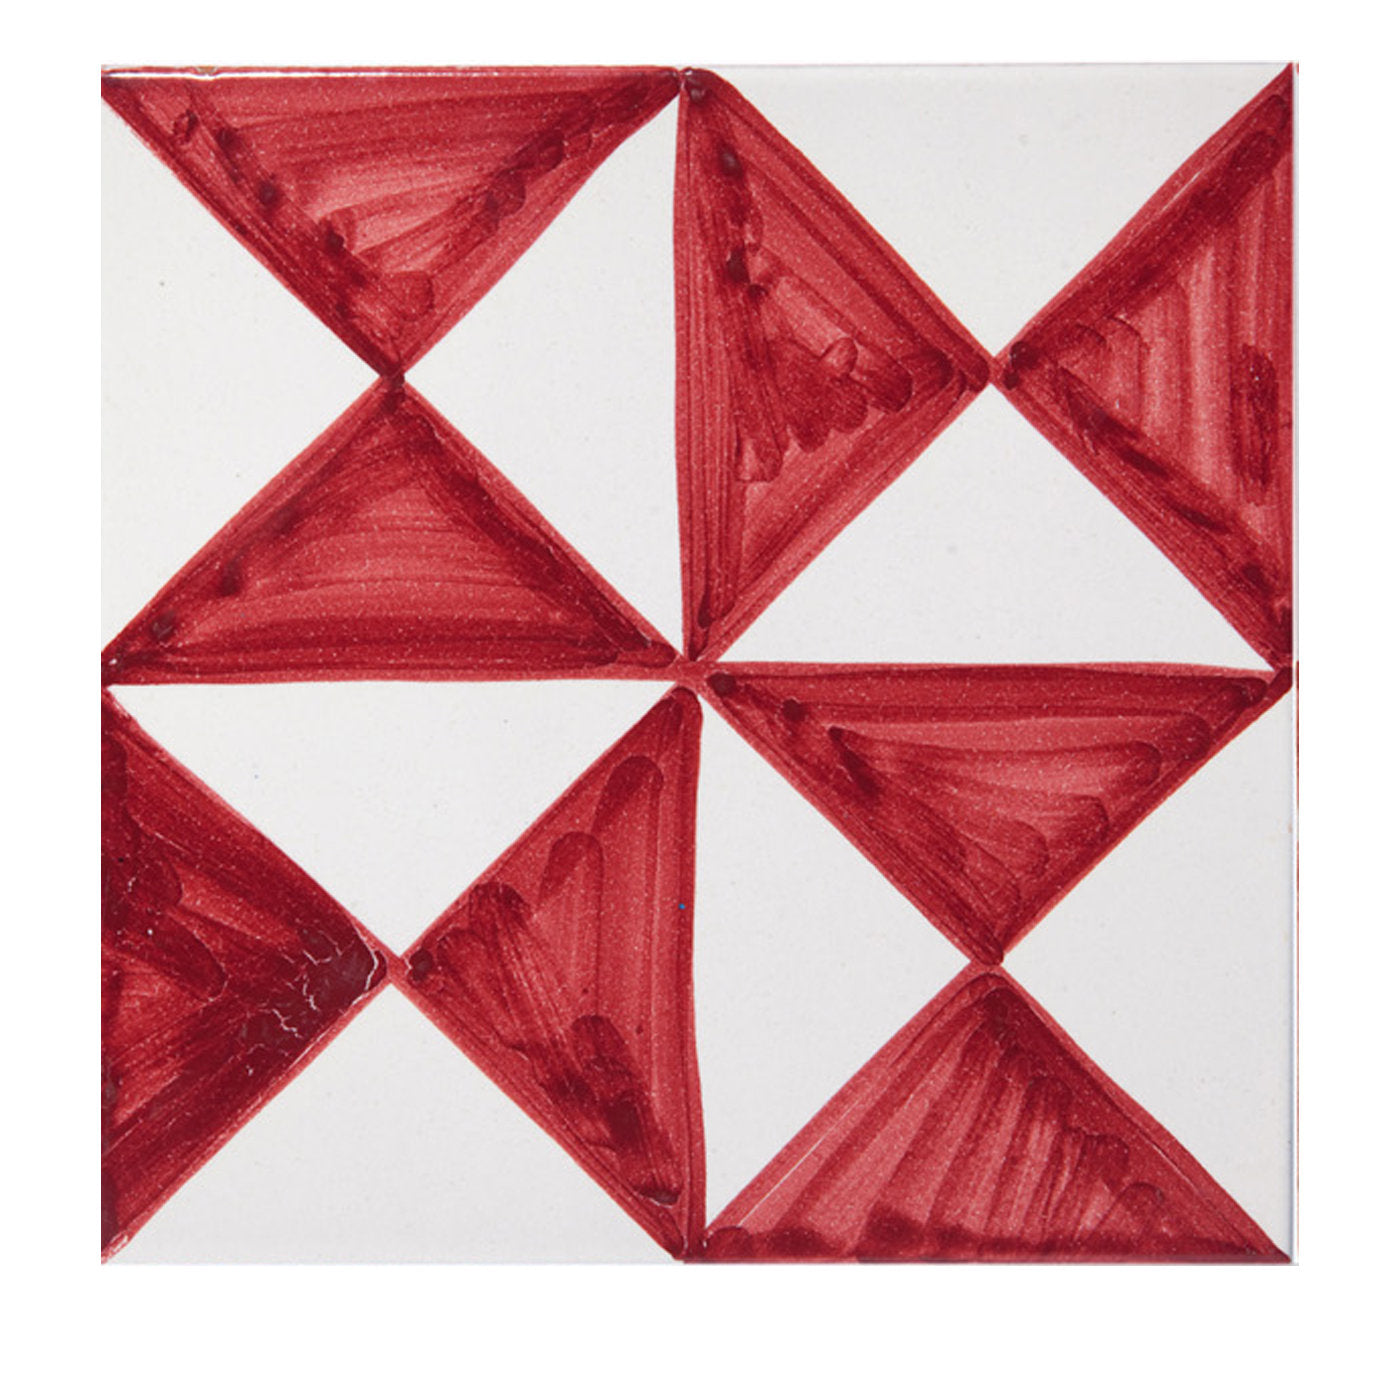 Set of 4 Riggiola Red Tiles - Alternative view 1